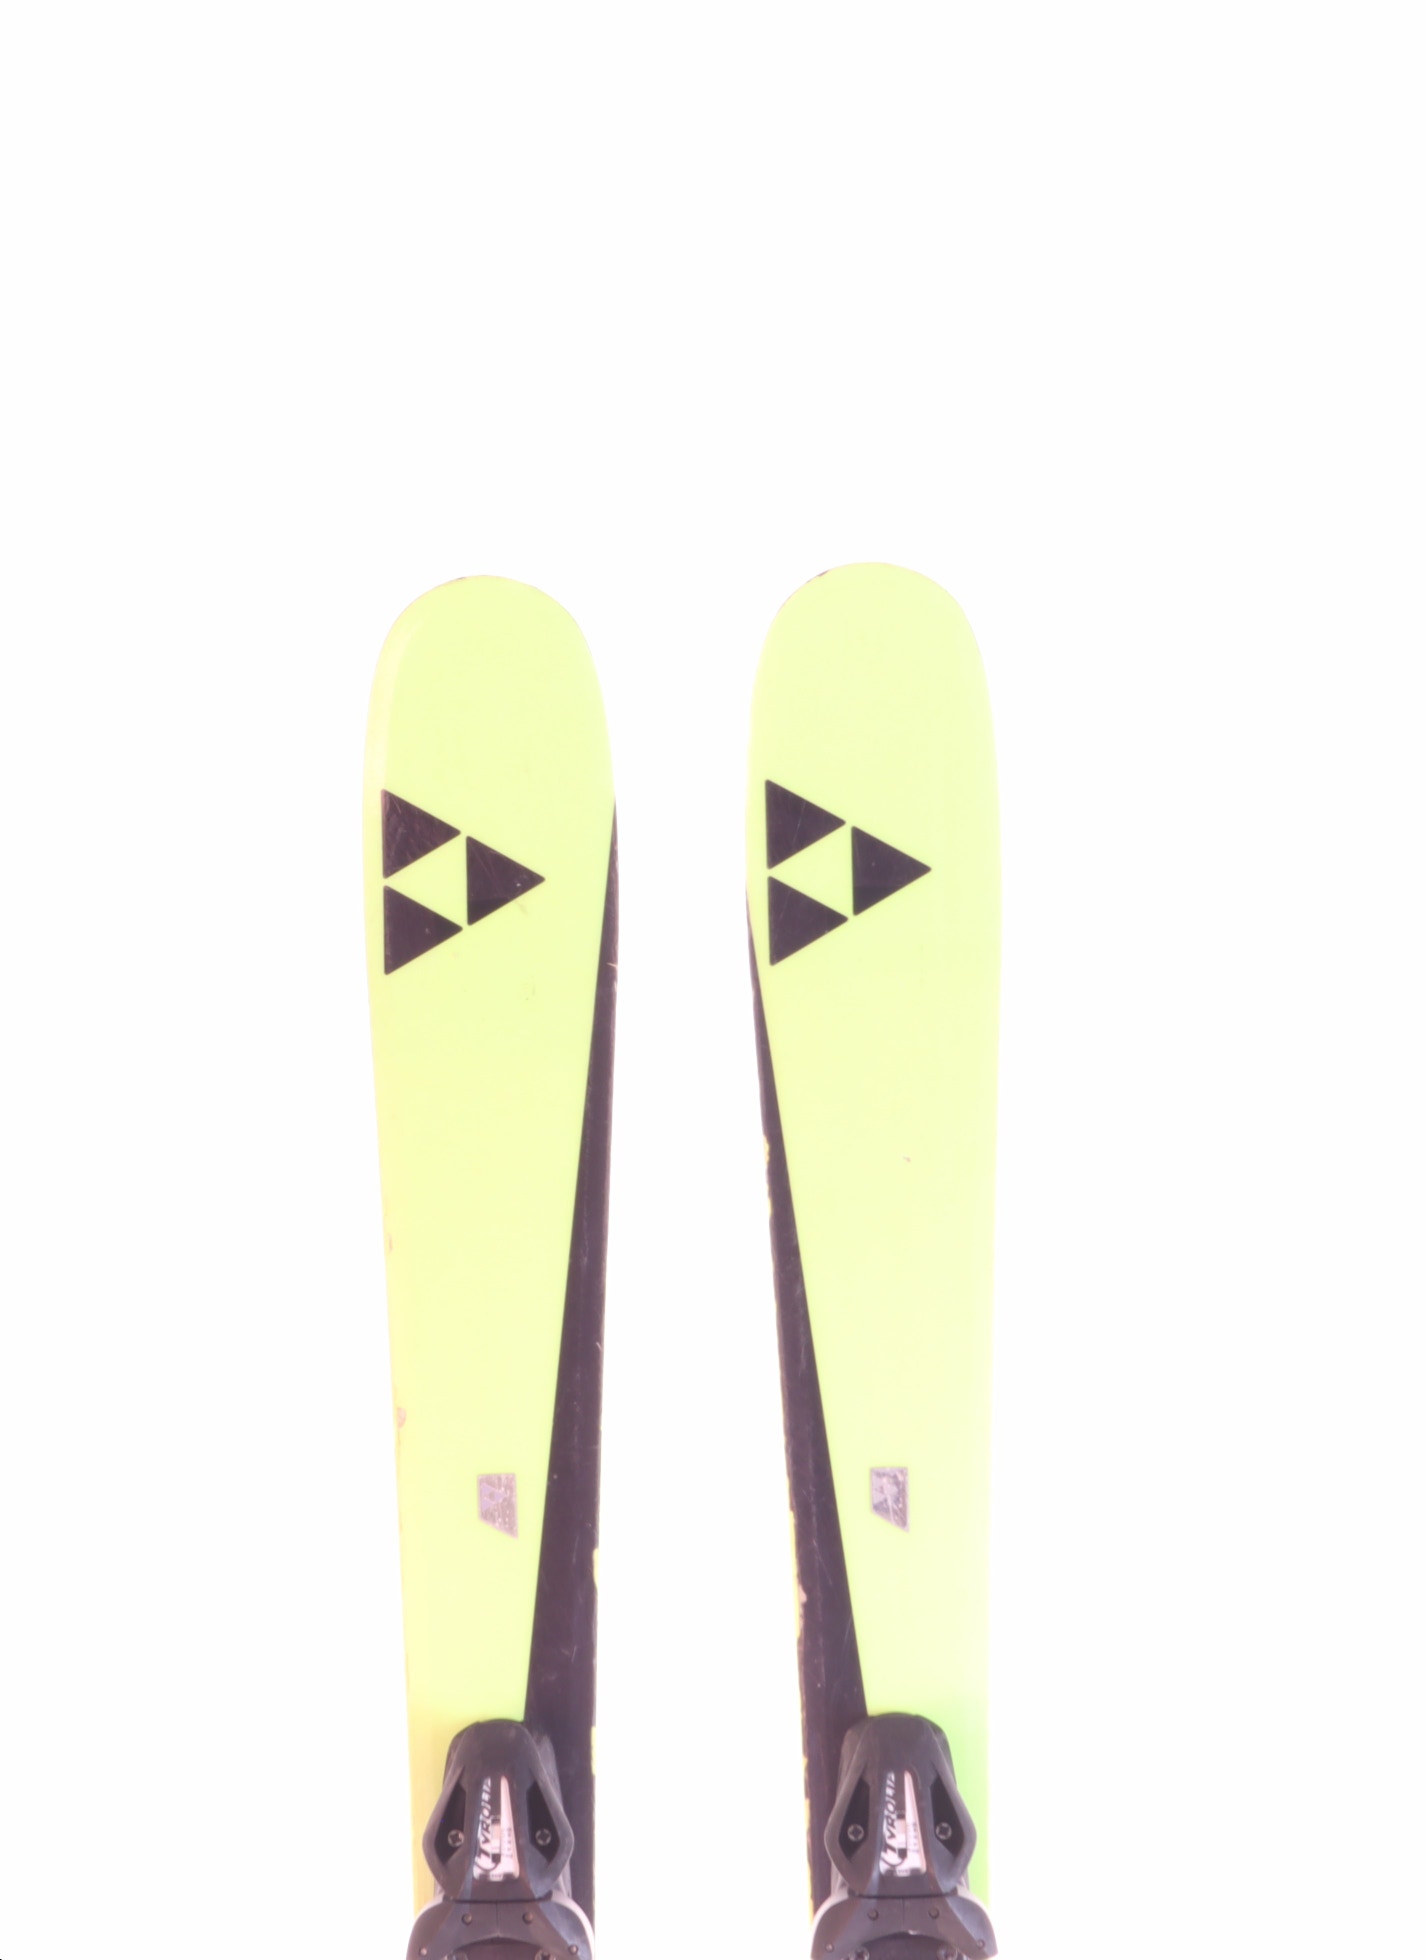 Used 2018 Fischer Ranger FR Skis With Tyrolia SP 10 Bindings Size 142 (Option 230768)